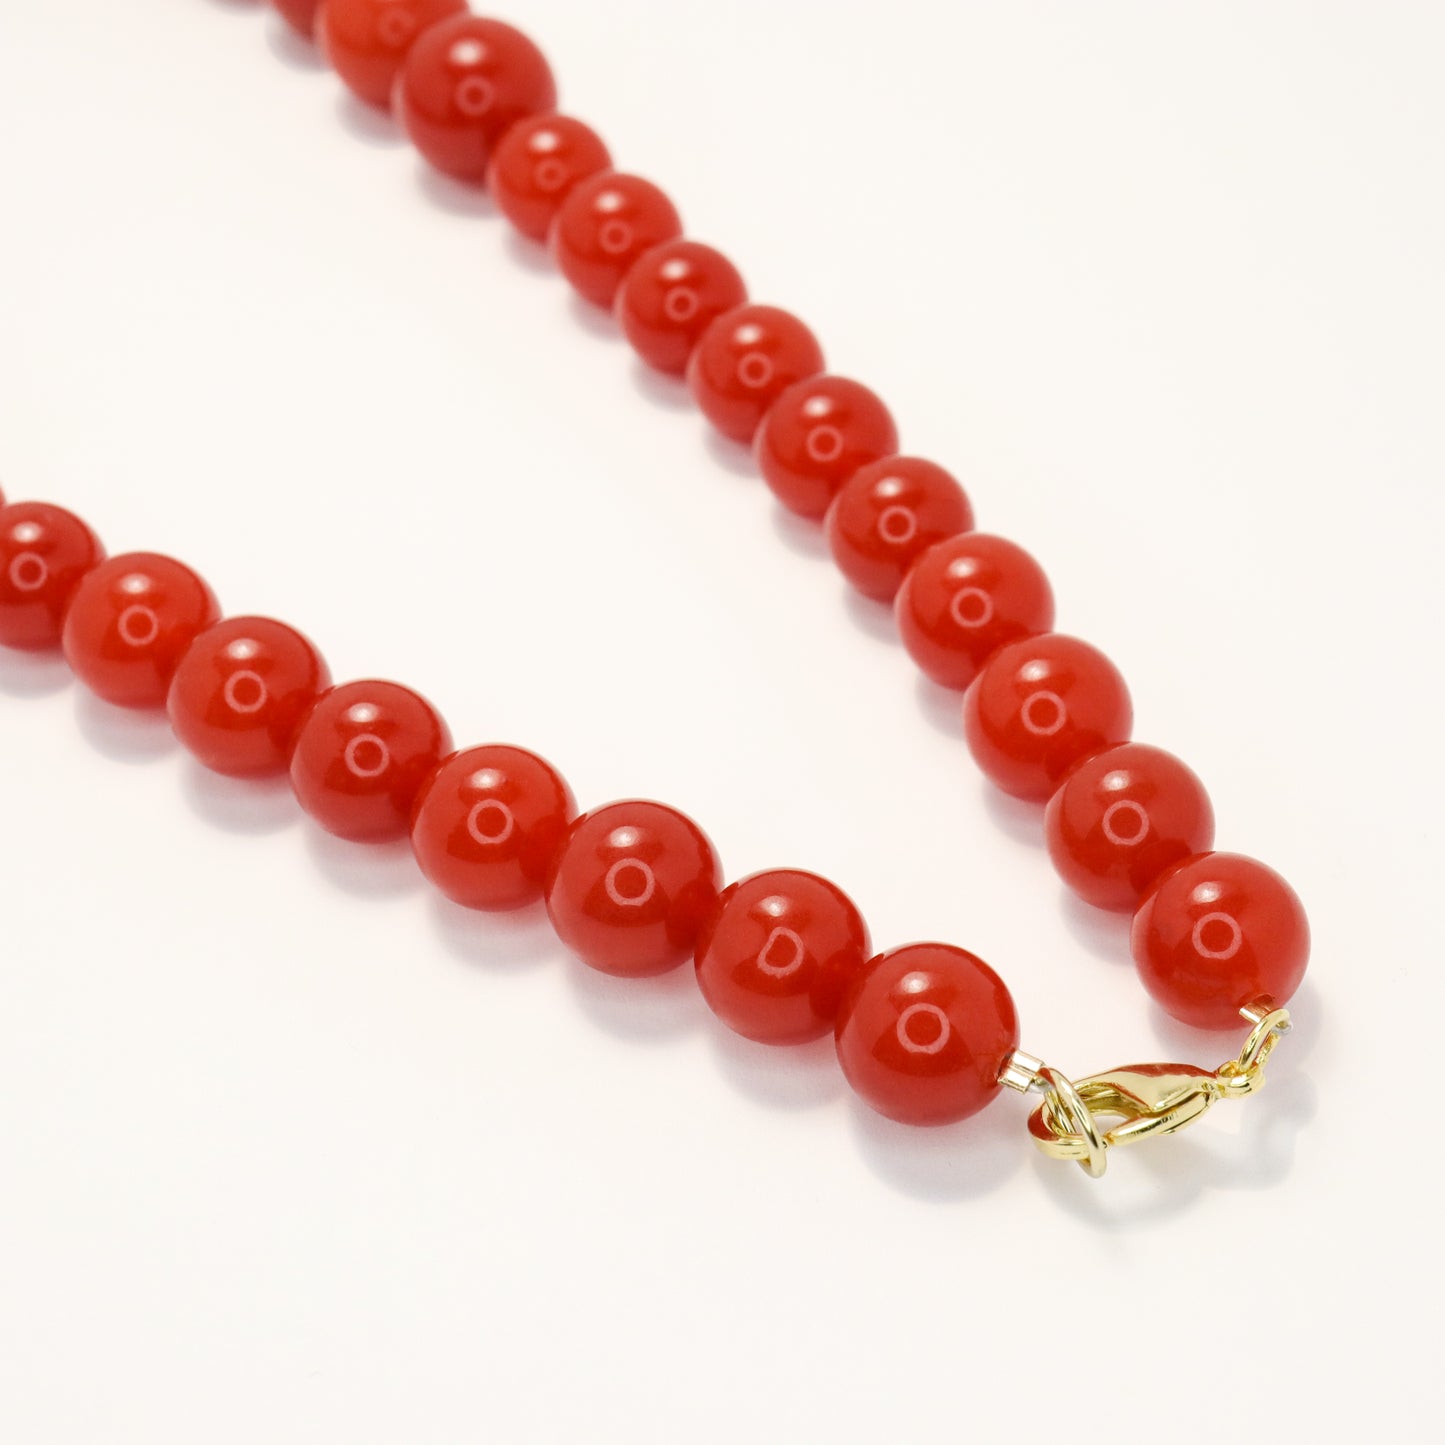 Honour & Wealth - South Red Agate Necklace